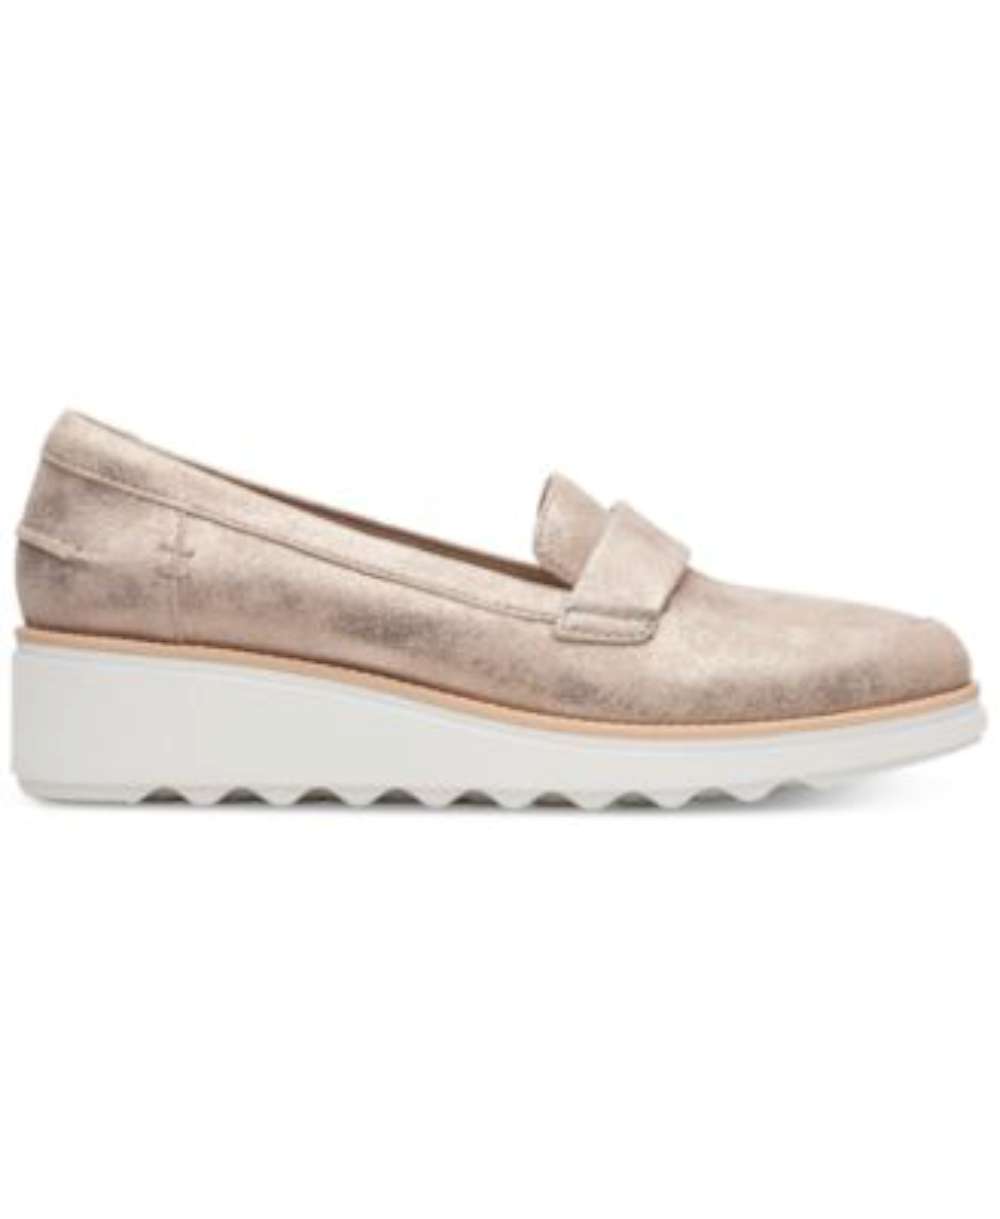 clarks sharon gracie loafers